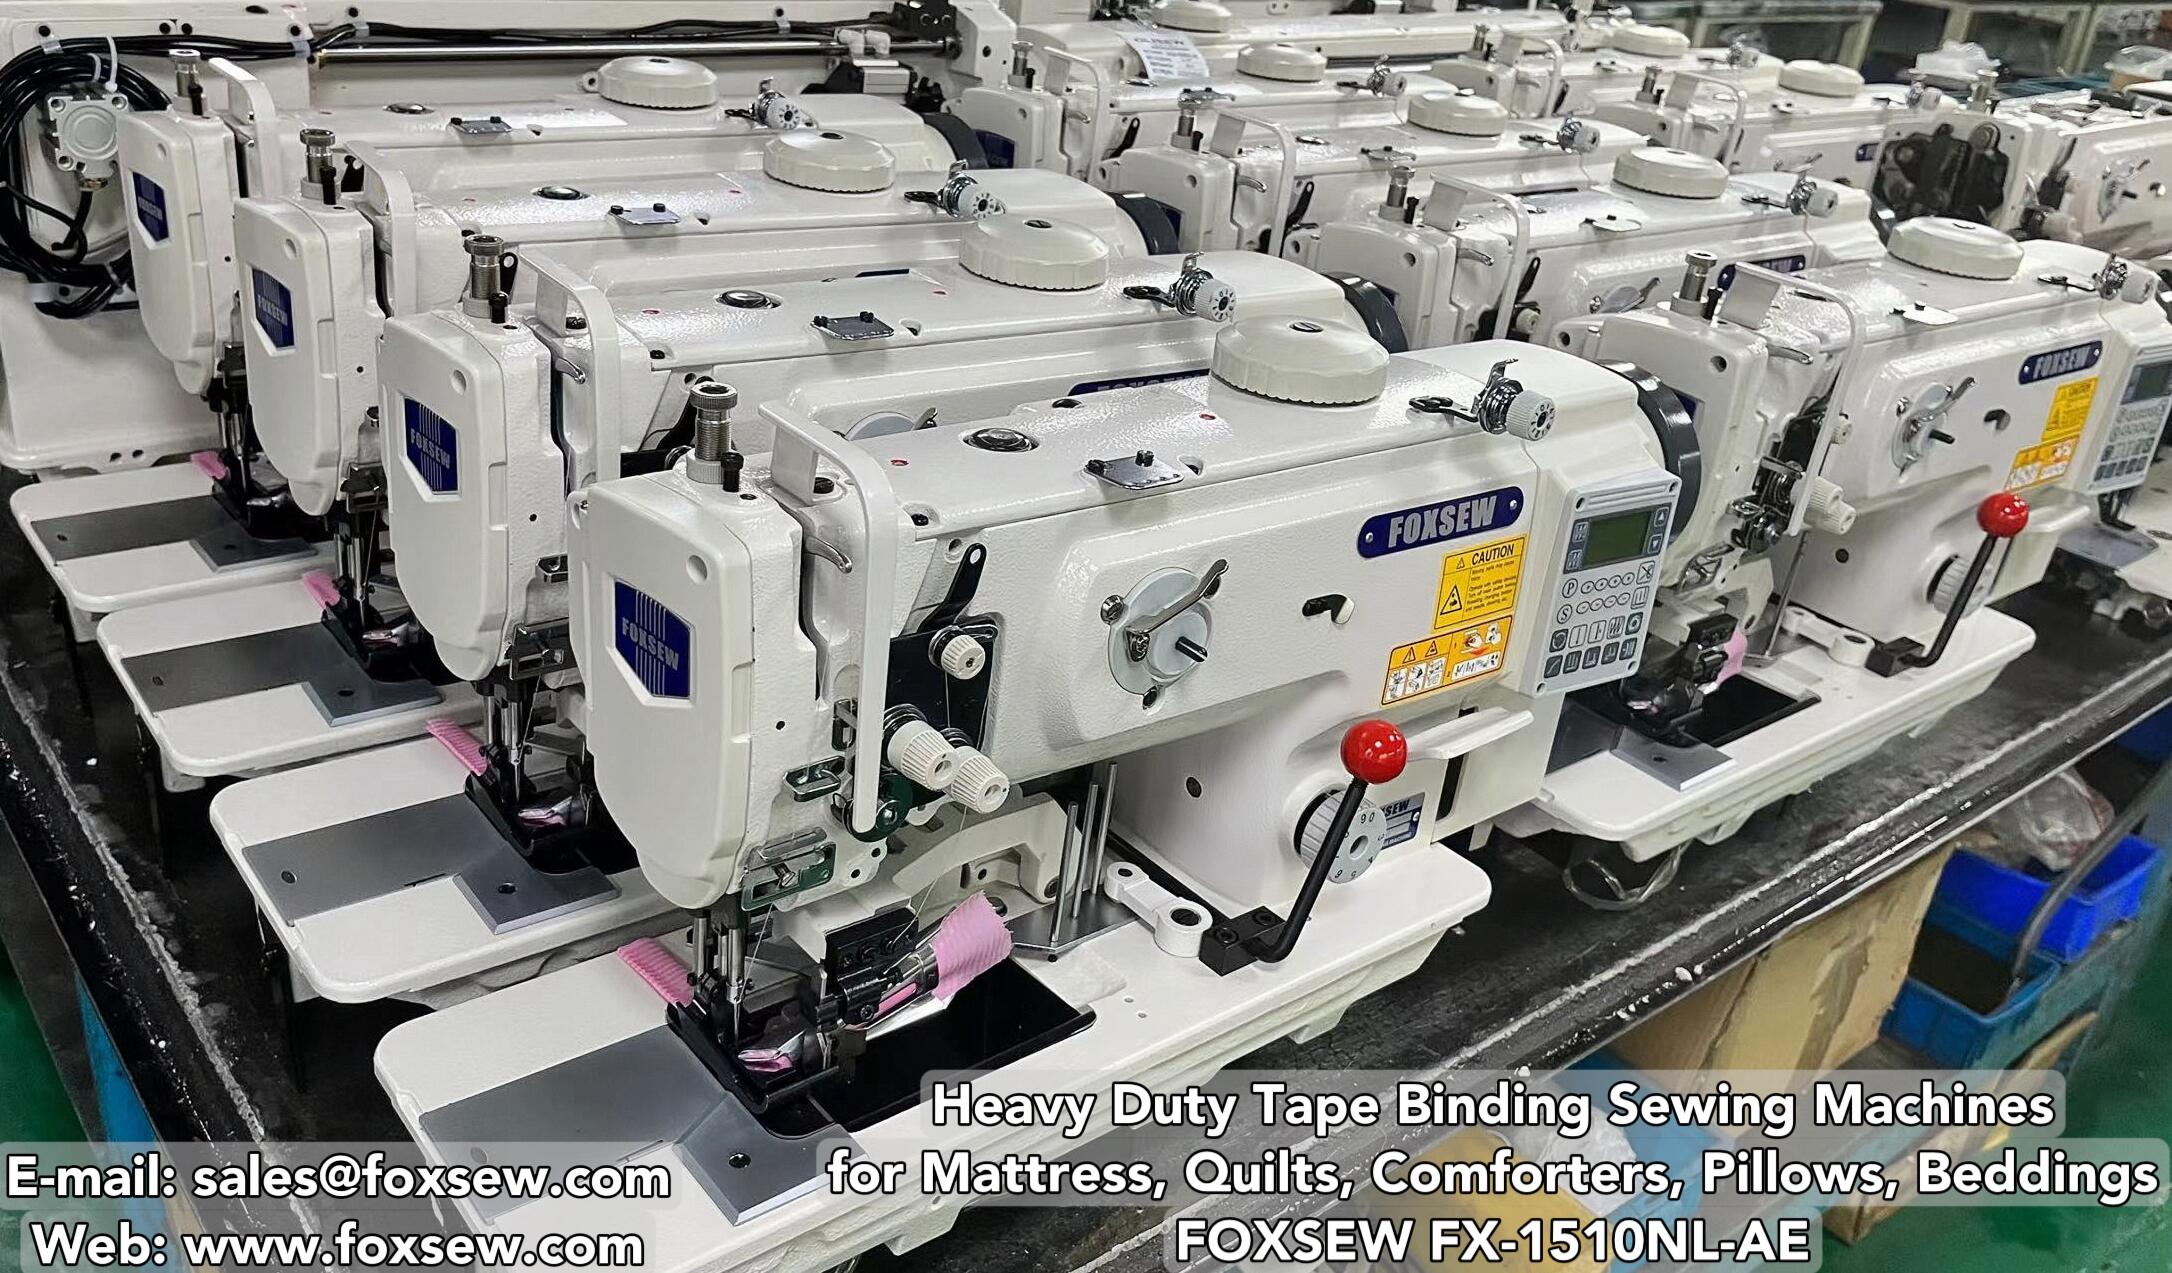 Heavy Duty Tape Binding Sewing Machines for Mattress Quilts Comformers FOXSEW FX-1510NL-AE -1